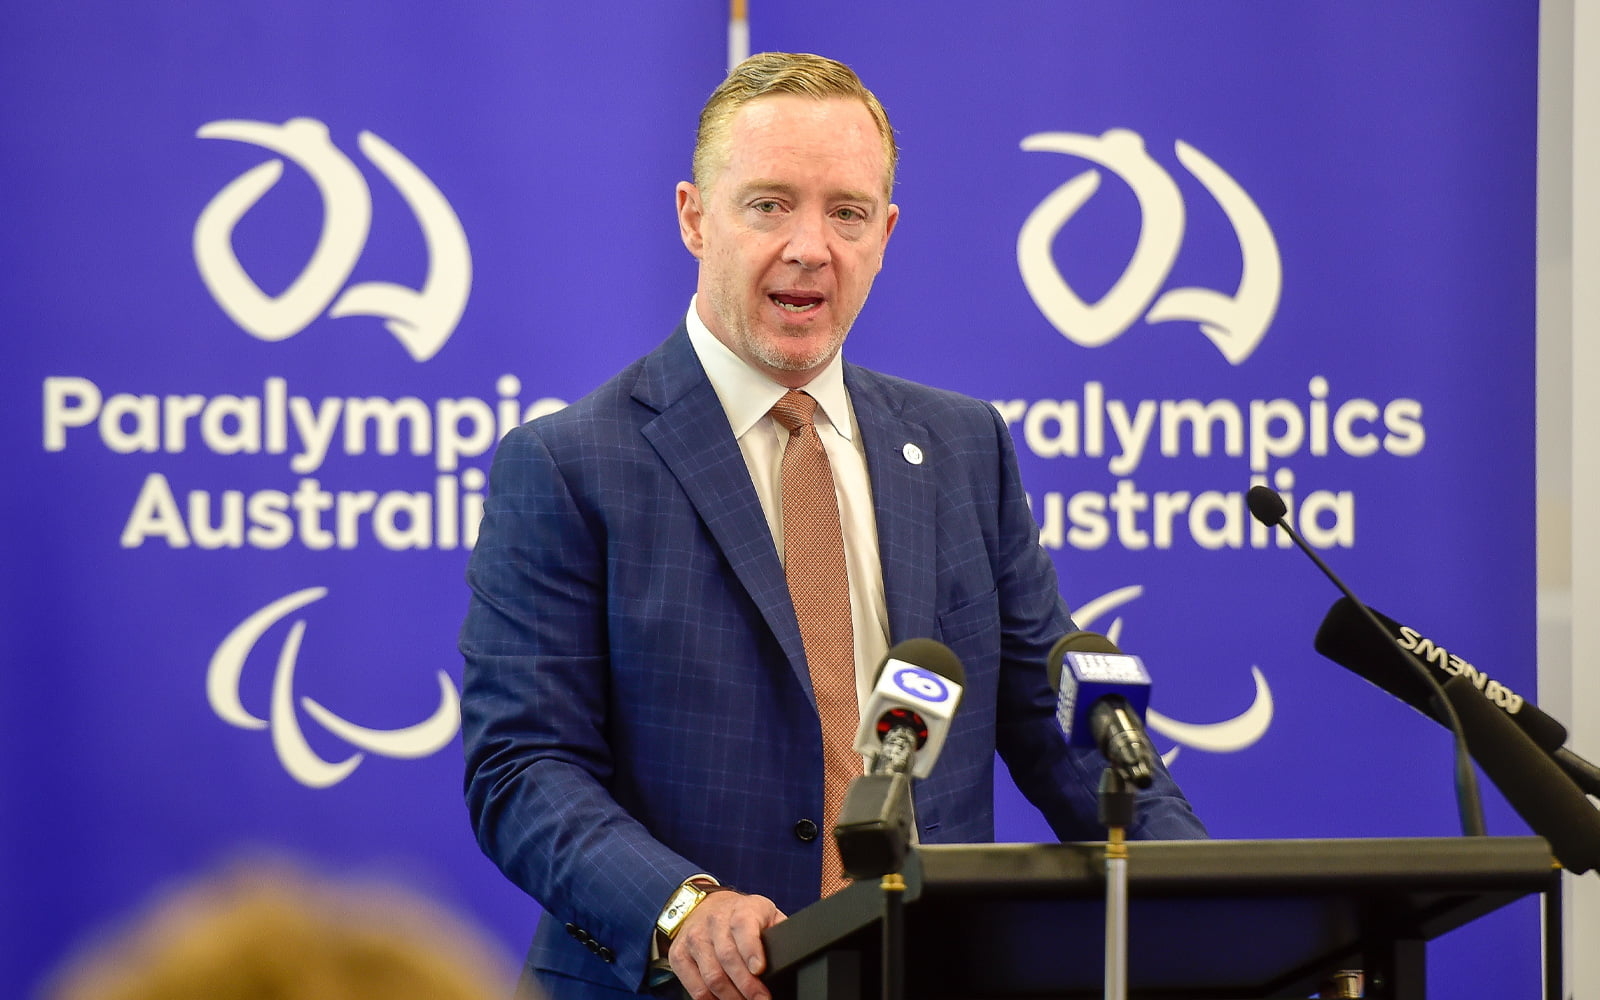 Jock O'Callaghan was replaced as President of Paralympics Australia after unsuccessfully trying to extend his term on the Board of Directors ©Paralympics Australia